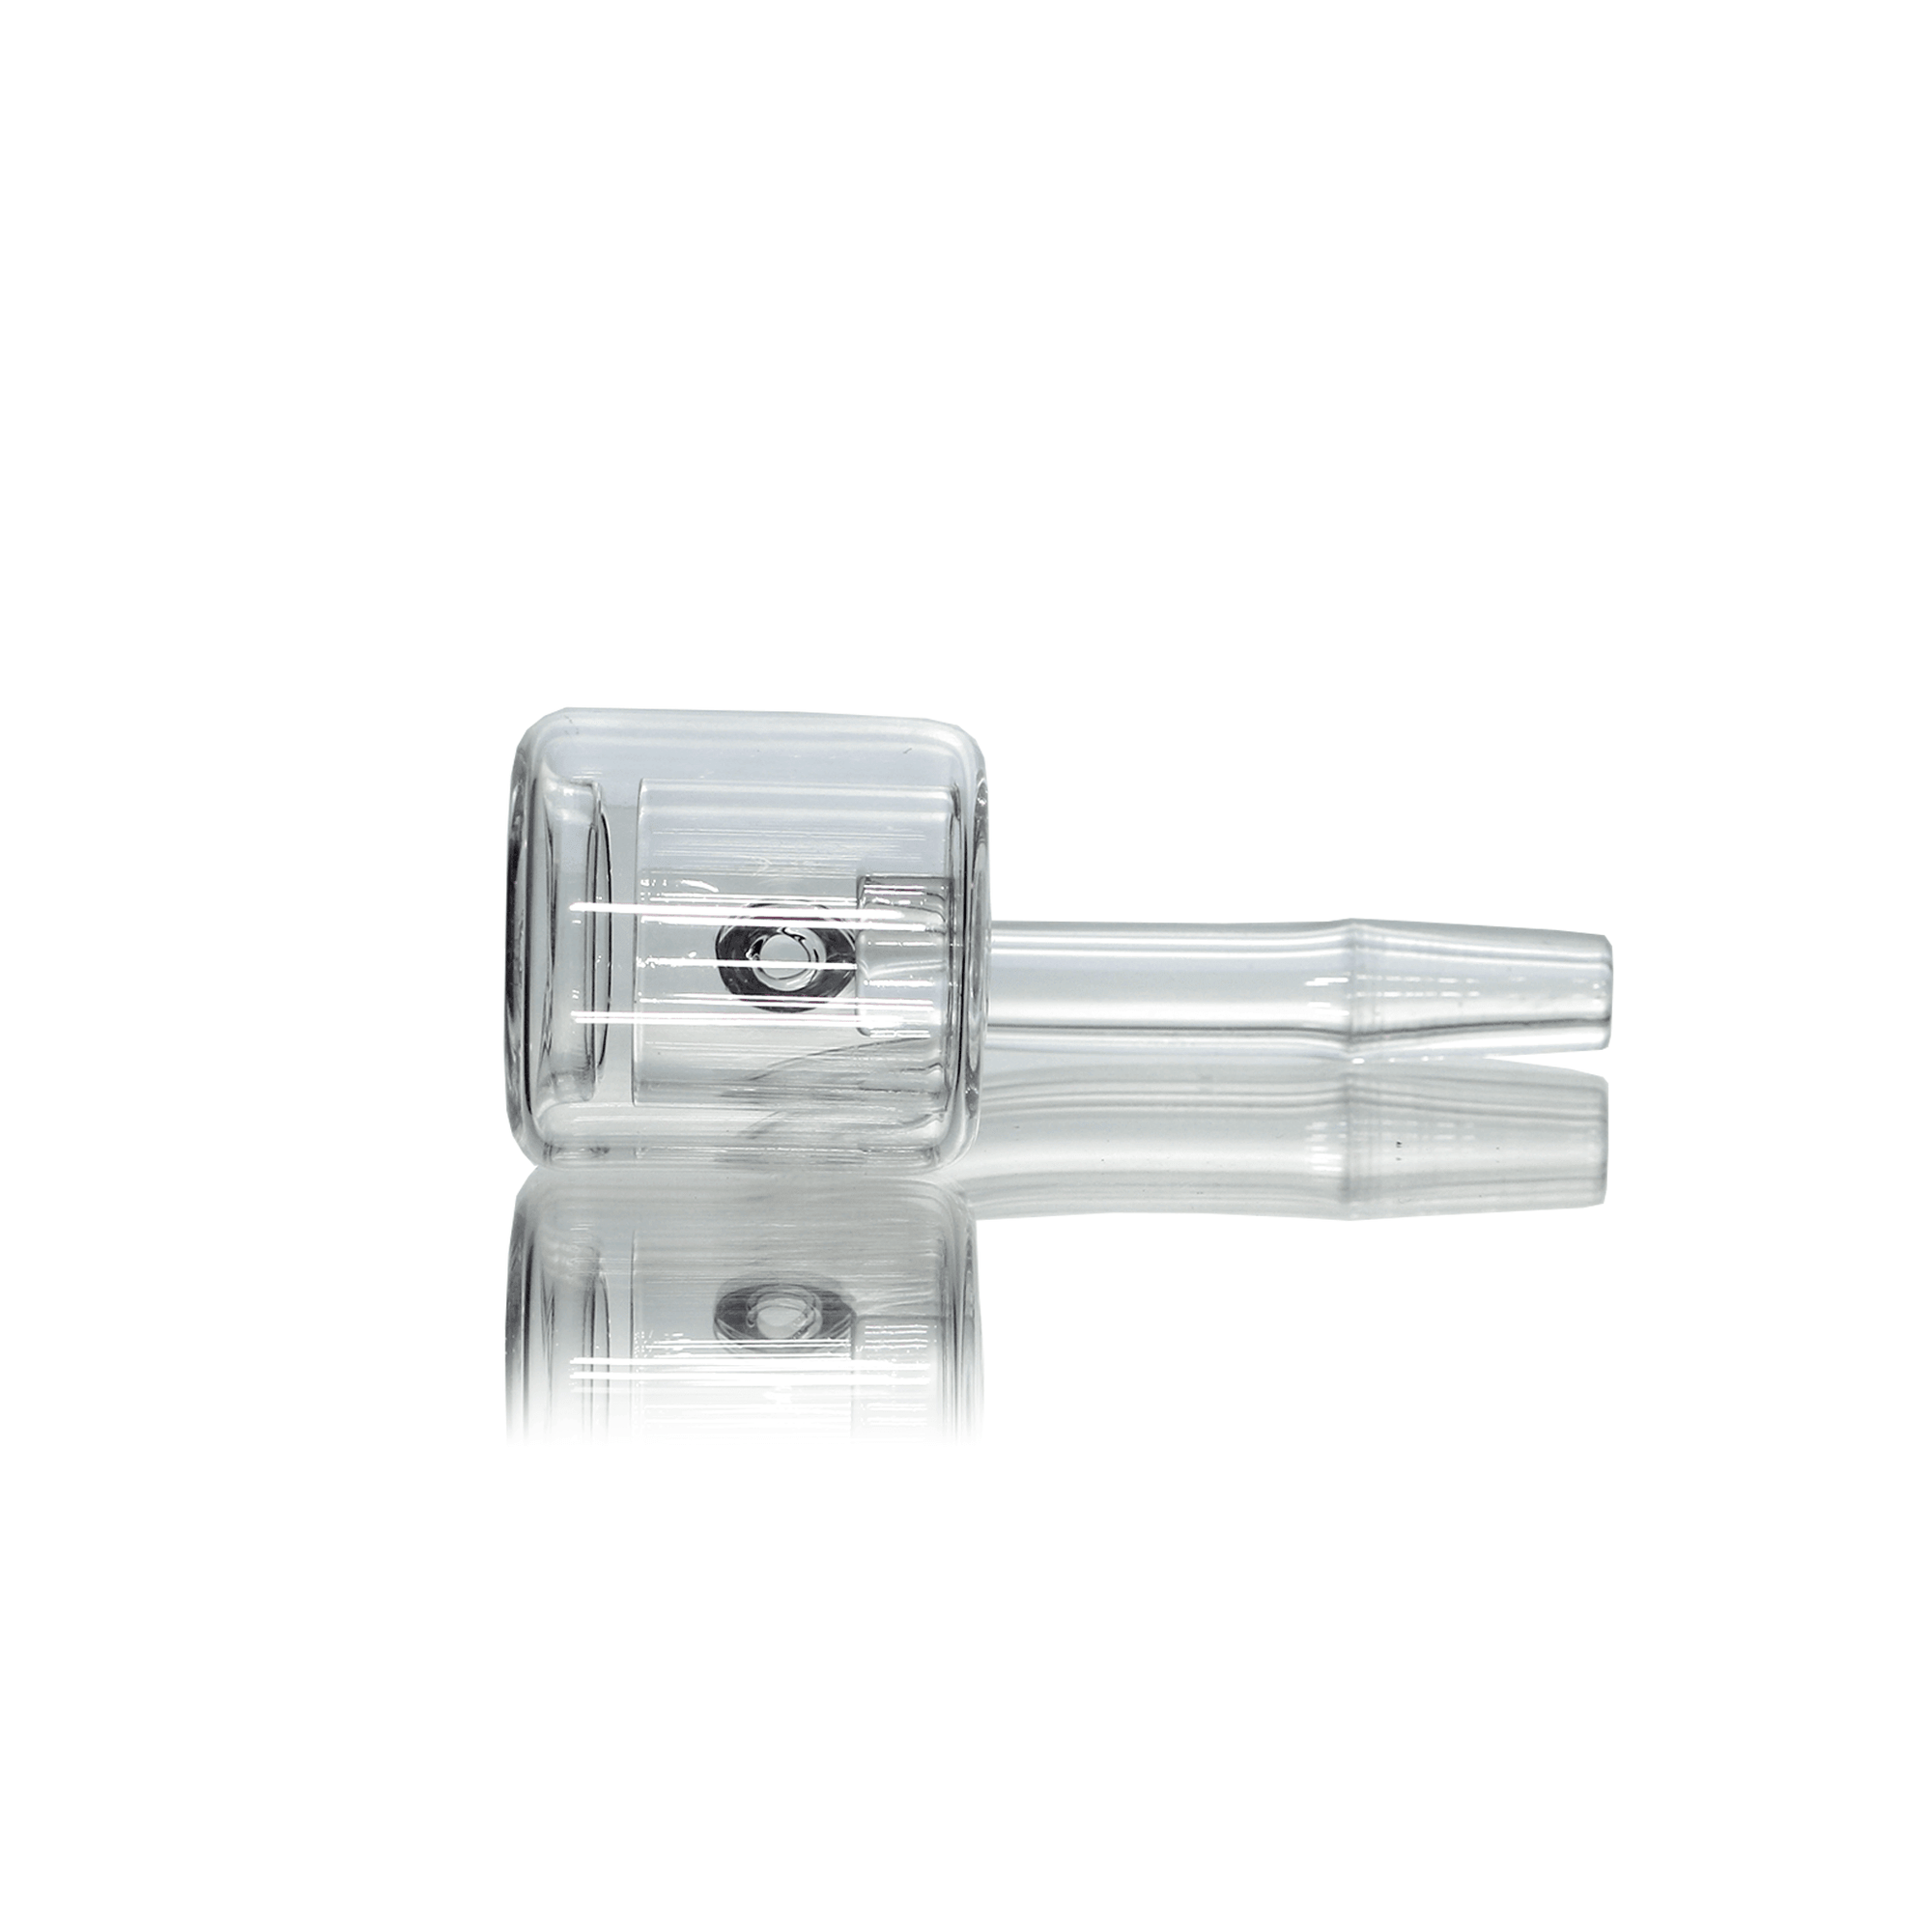 Quartz Banger Thermal Core Reactor | 10mm Male With Saucer Cap | Prone | the dabbing specialists